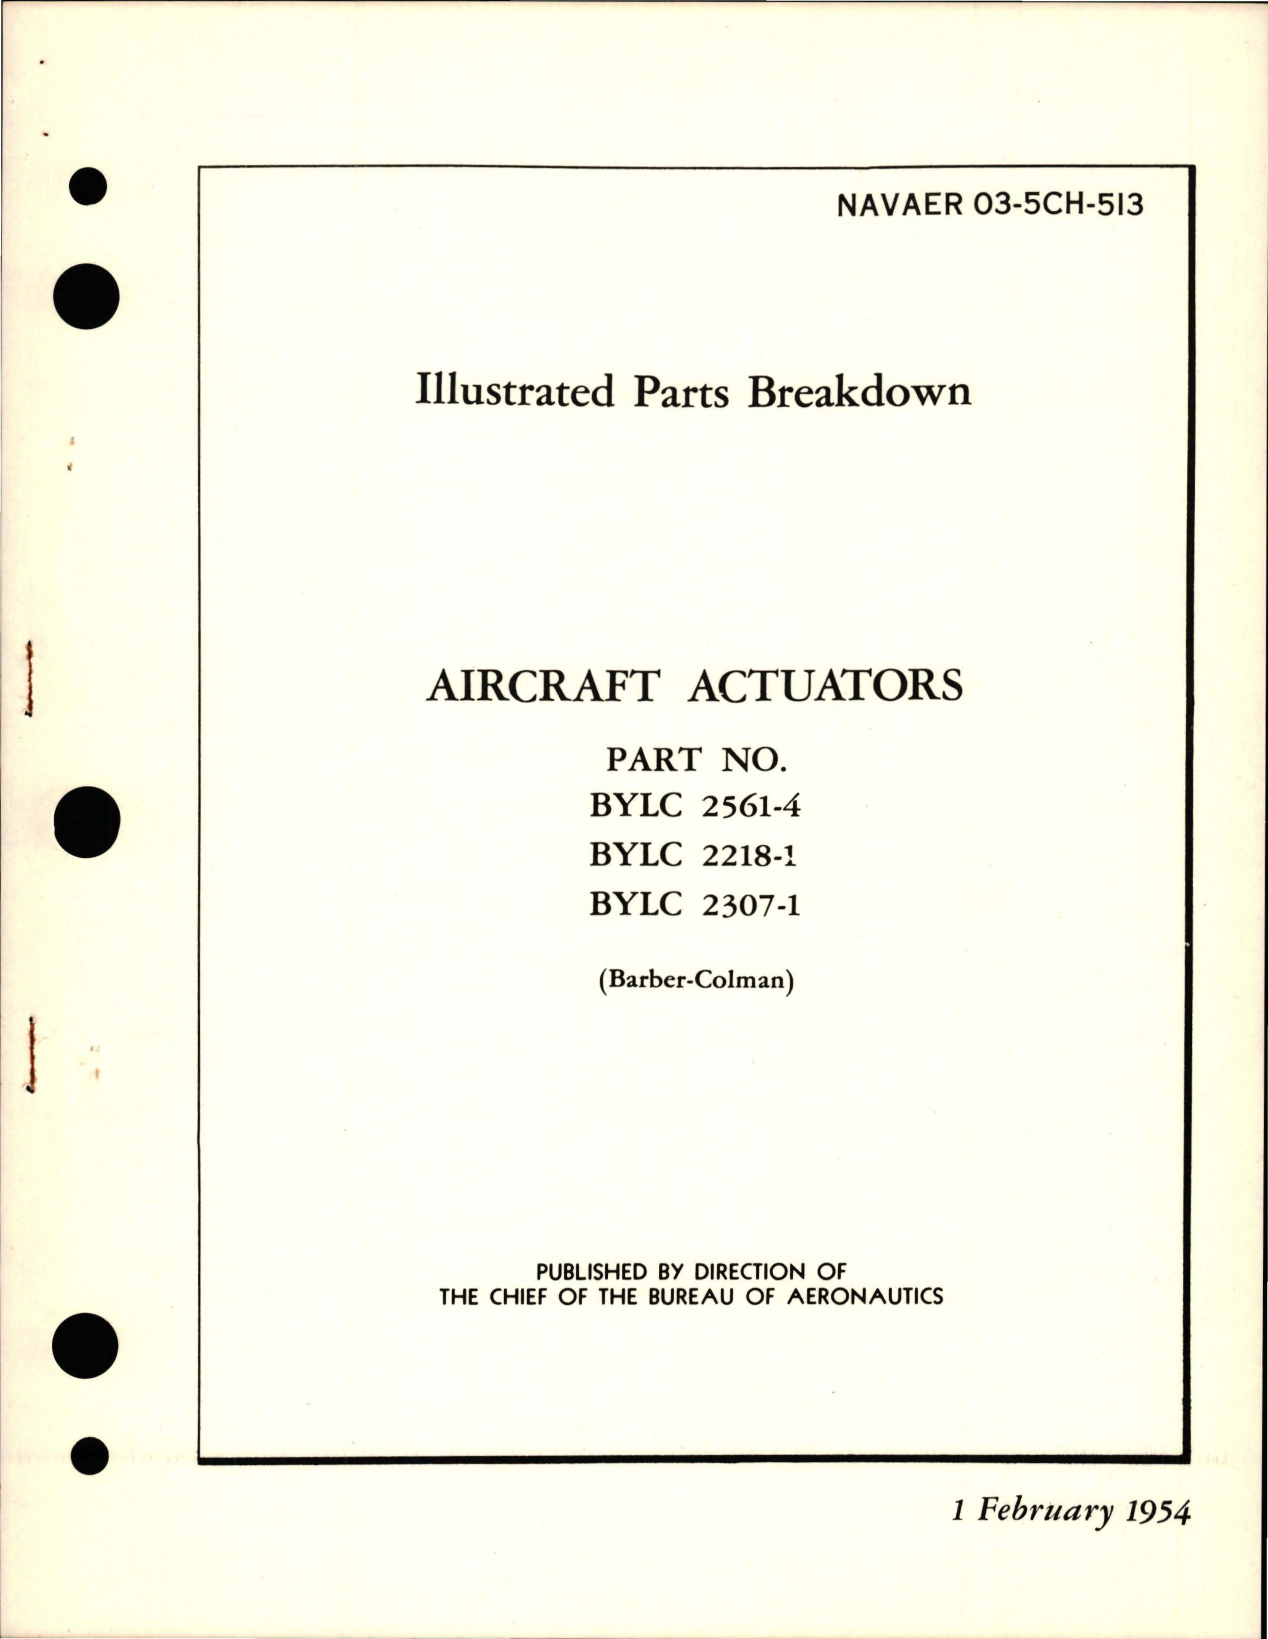 Sample page 1 from AirCorps Library document: Illustrated Parts Breakdown for Actuators - Parts BYLC 2561-4, BYLC 2218-1, and BYLC 2307-1